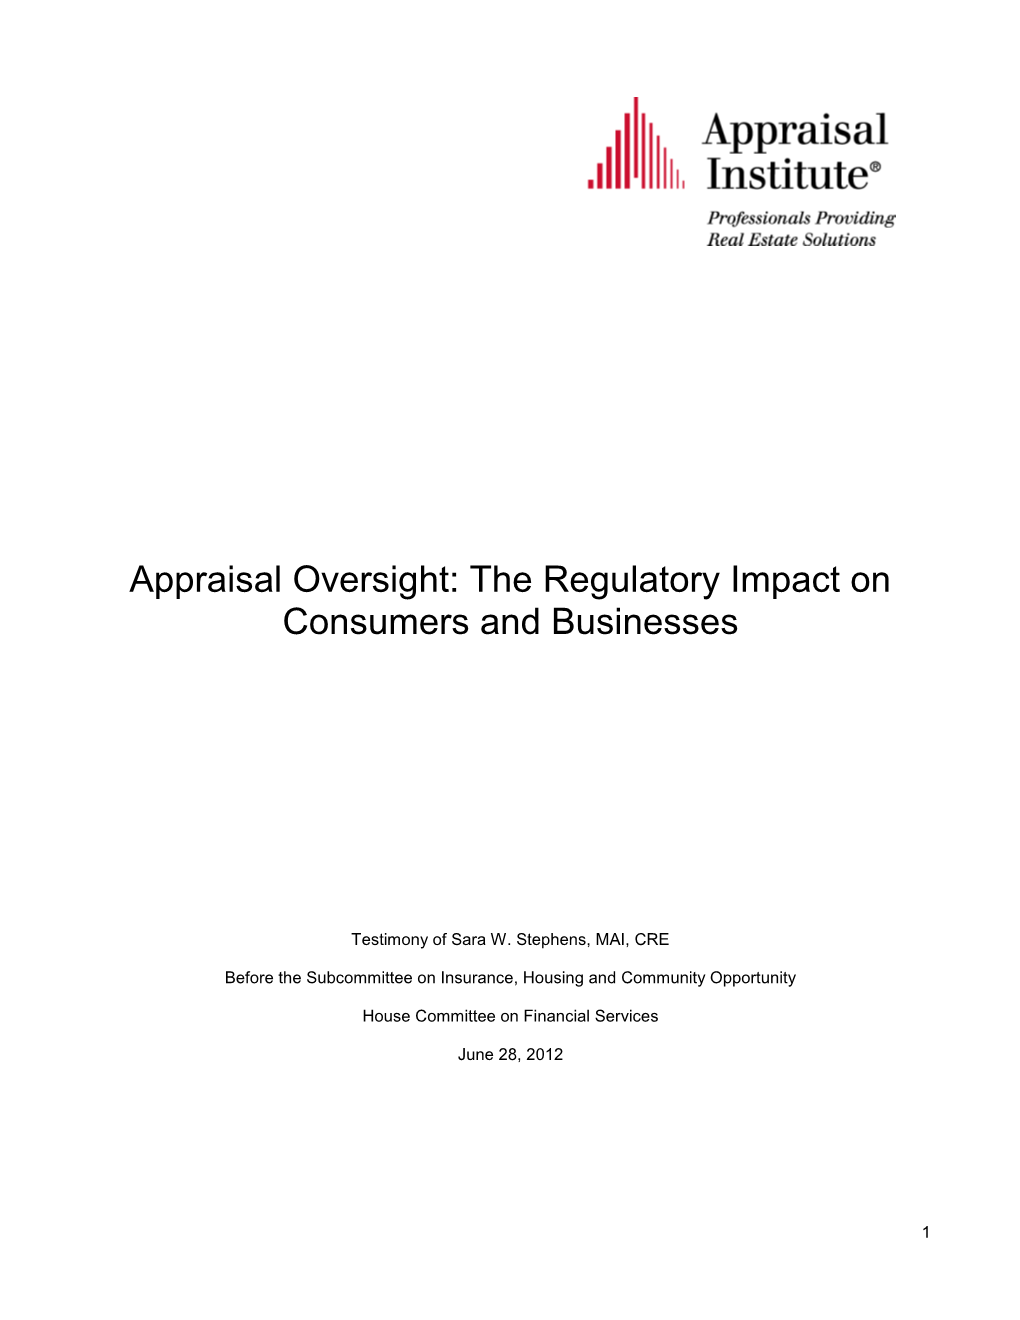 Appraisal Oversight: the Regulatory Impact on Consumers and Businesses